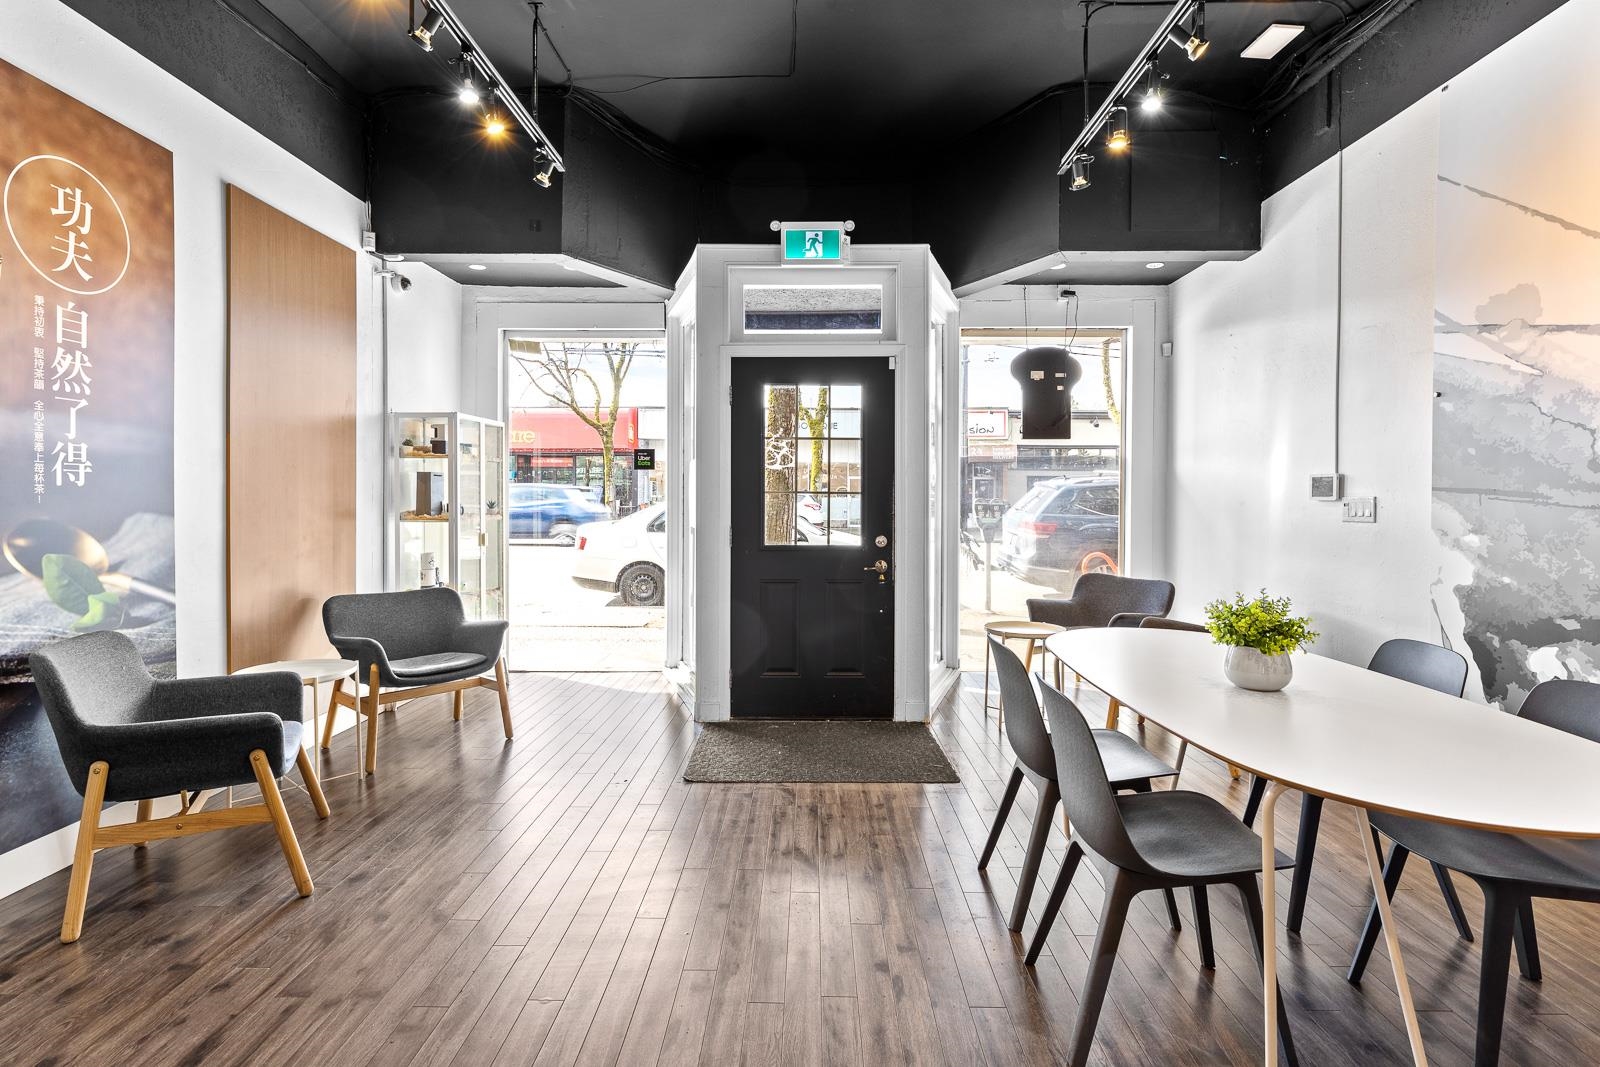 Wilson Lam Realtor, 2855 BROADWAY STREET, Vancouver, British Columbia V6K 2G6, Business,For Lease ,C8050672